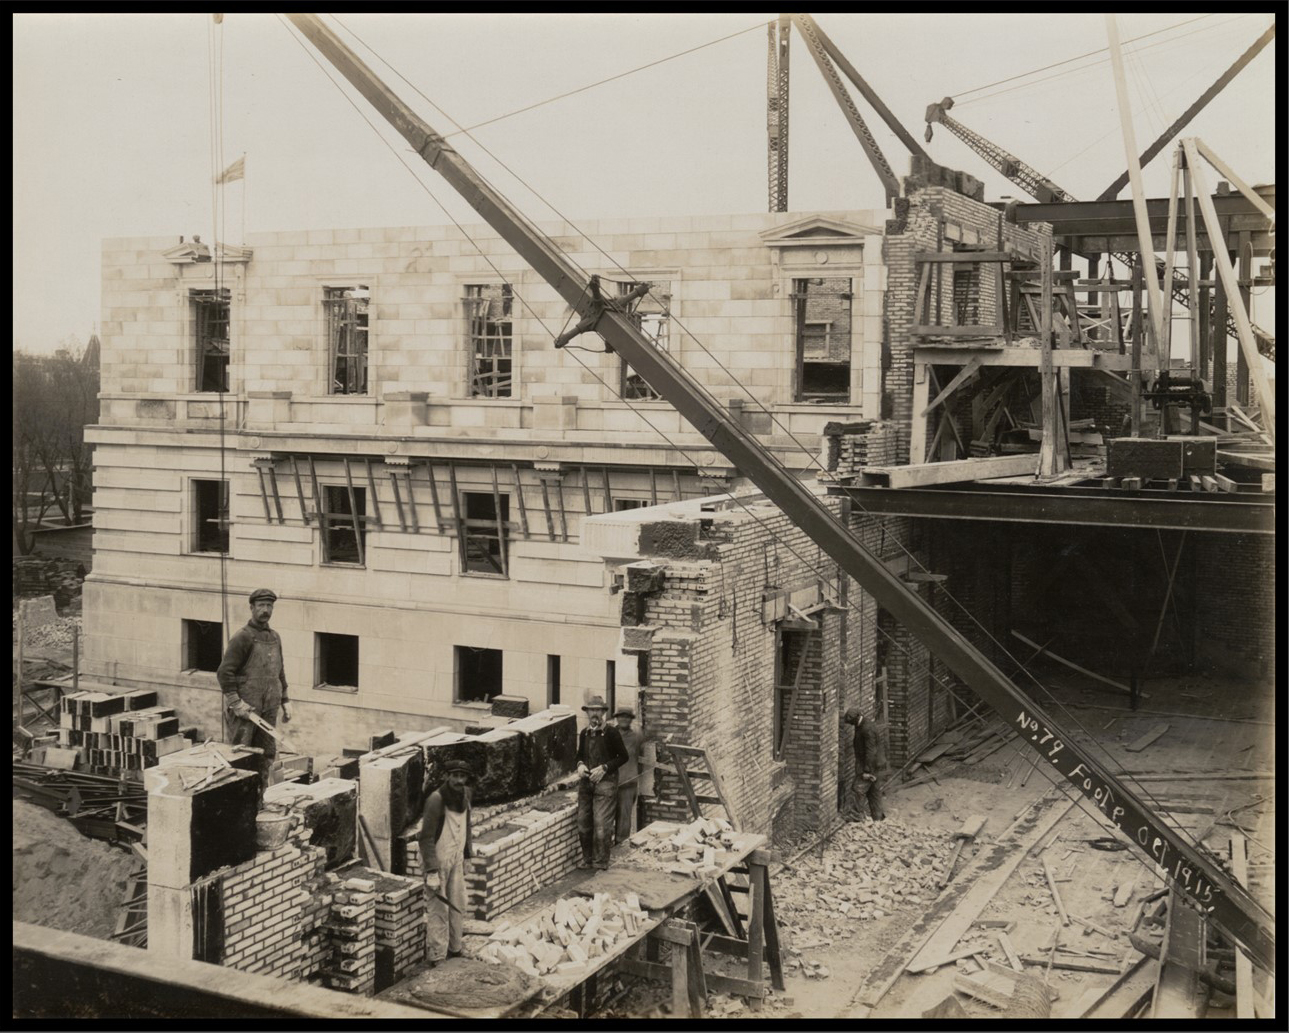 Photo from inside the building, looking down on several masons laying bricks for an exterior wall. A complete exterior wall can be seen through the incomplete brick wall.